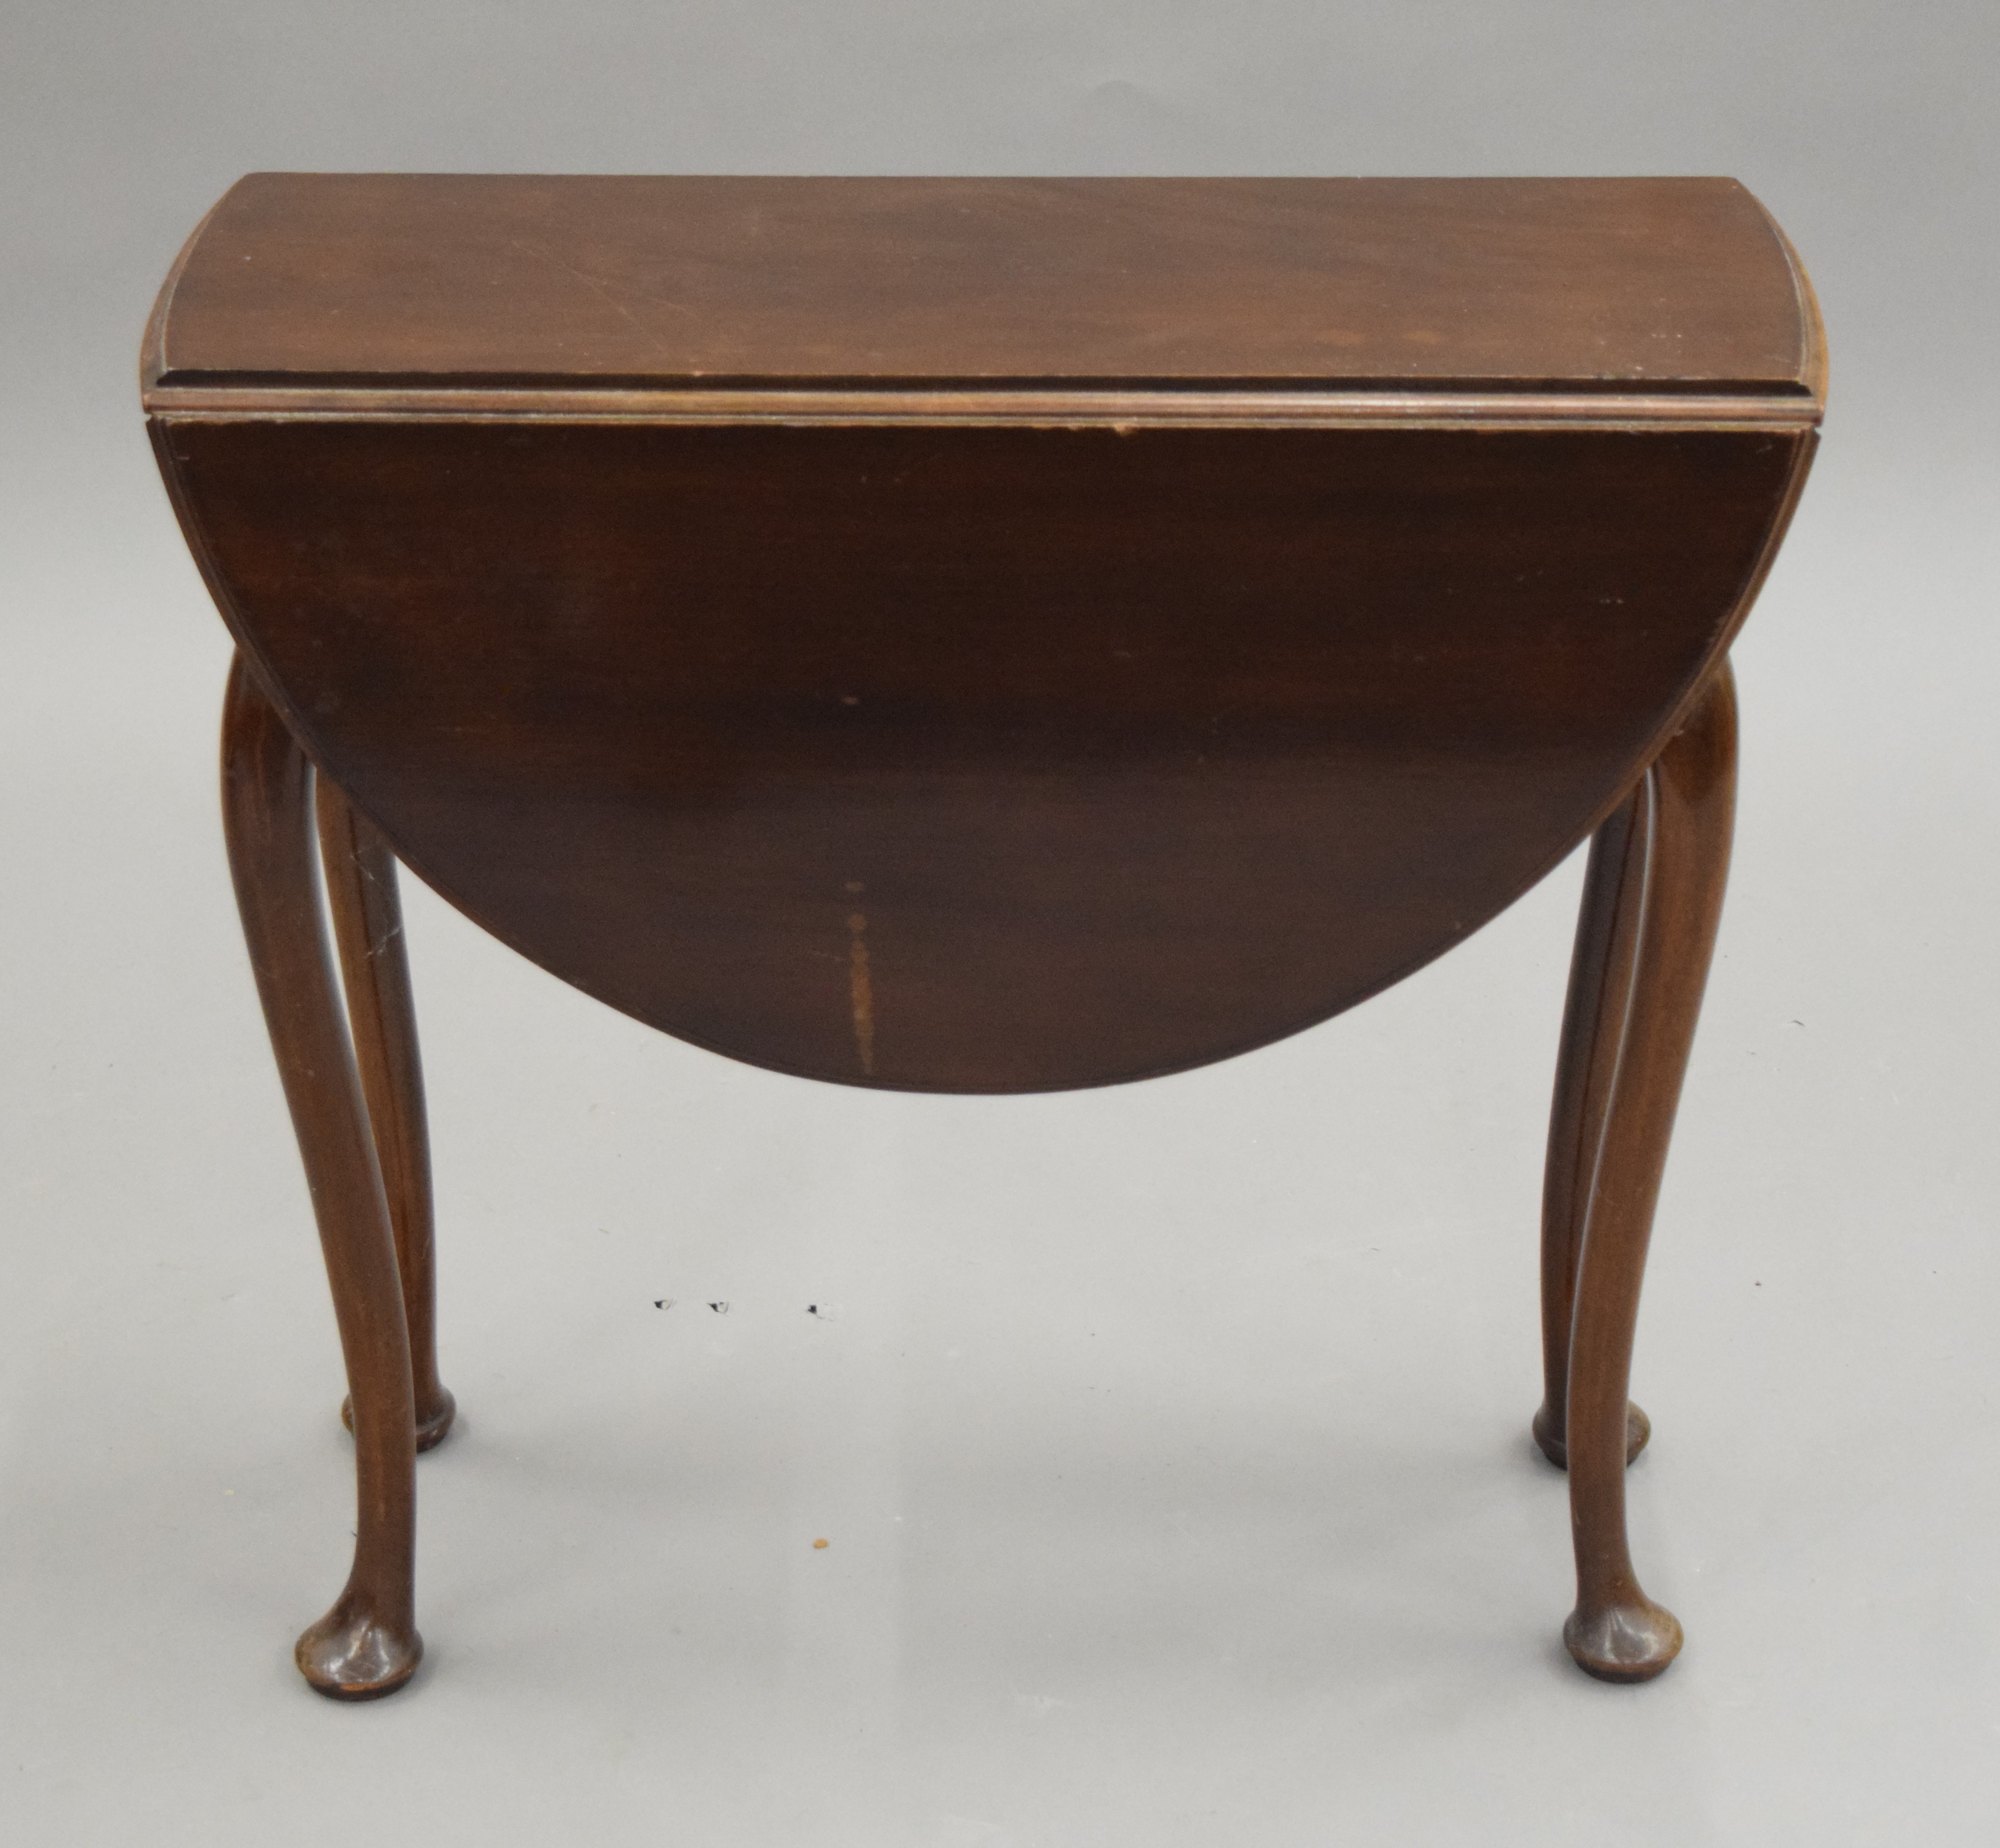 A small early 20th century mahogany drop leaf table. 59.5 cm long.